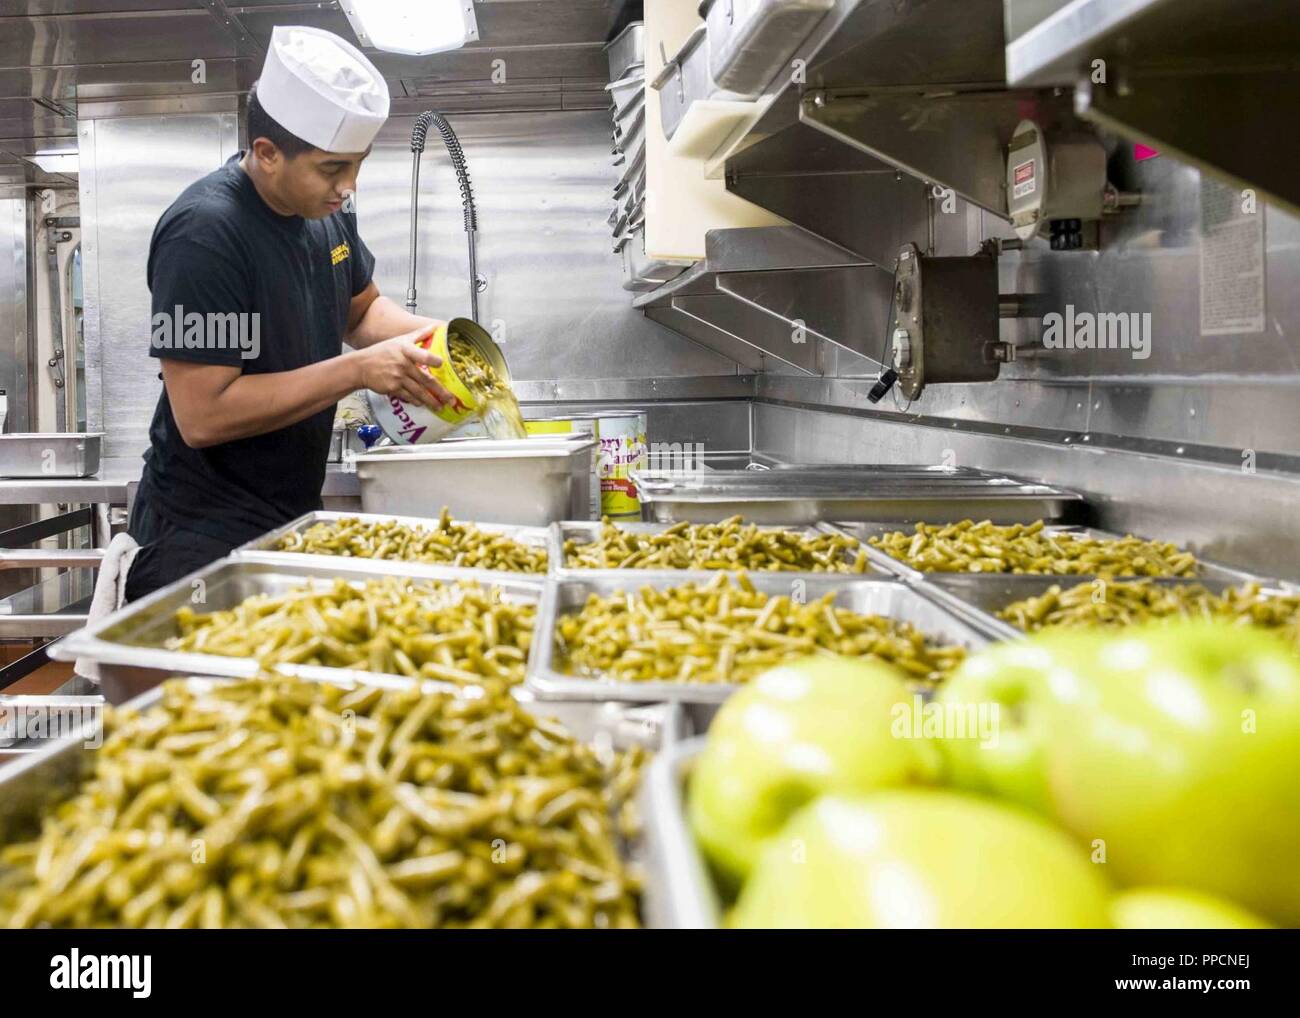 SOUTH CHINA SEA (Aug. 19, 2018) Culinary Specialist Seaman Jasta Yu, from Lake Stevens, Wash., prepares a meal for the crew in the galley of San Antonio-class amphibious transport dock USS Anchorage (LPD 23) during a regularly scheduled deployment of the Essex Amphibious Ready Group (ARG) and 13th Marine Expeditionary Unit (MEU). The Essex ARG/13th MEU is a capable and lethal Navy-Marine Corps team deployed to the 7th fleet area of operations to support regional stability, reassure partners and allies and maintain a presence postured to respond to any crisis ranging from humanitarian assistanc Stock Photo